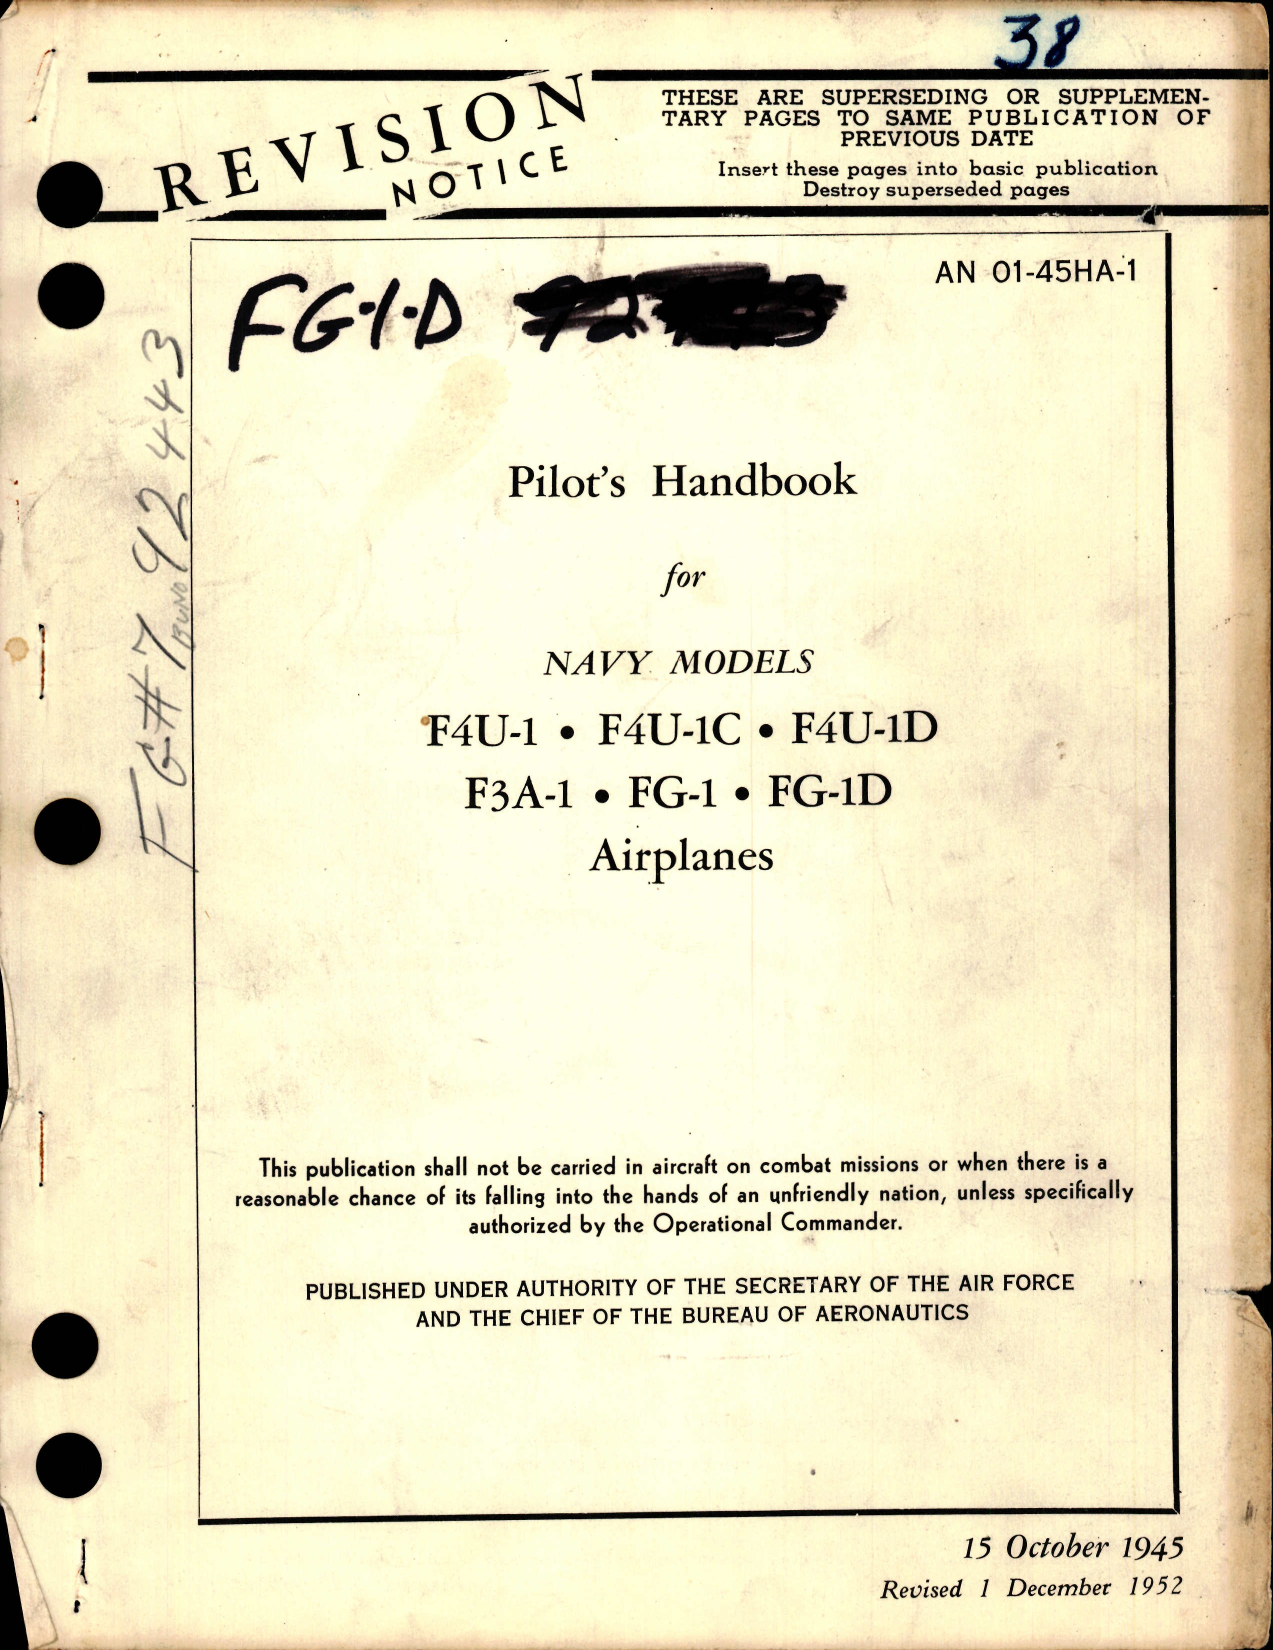 Sample page 1 from AirCorps Library document: Pilot's Handbook for F4U-1, F4U-1C, F4U-1D, F3A-1, FG-1, FG-1D